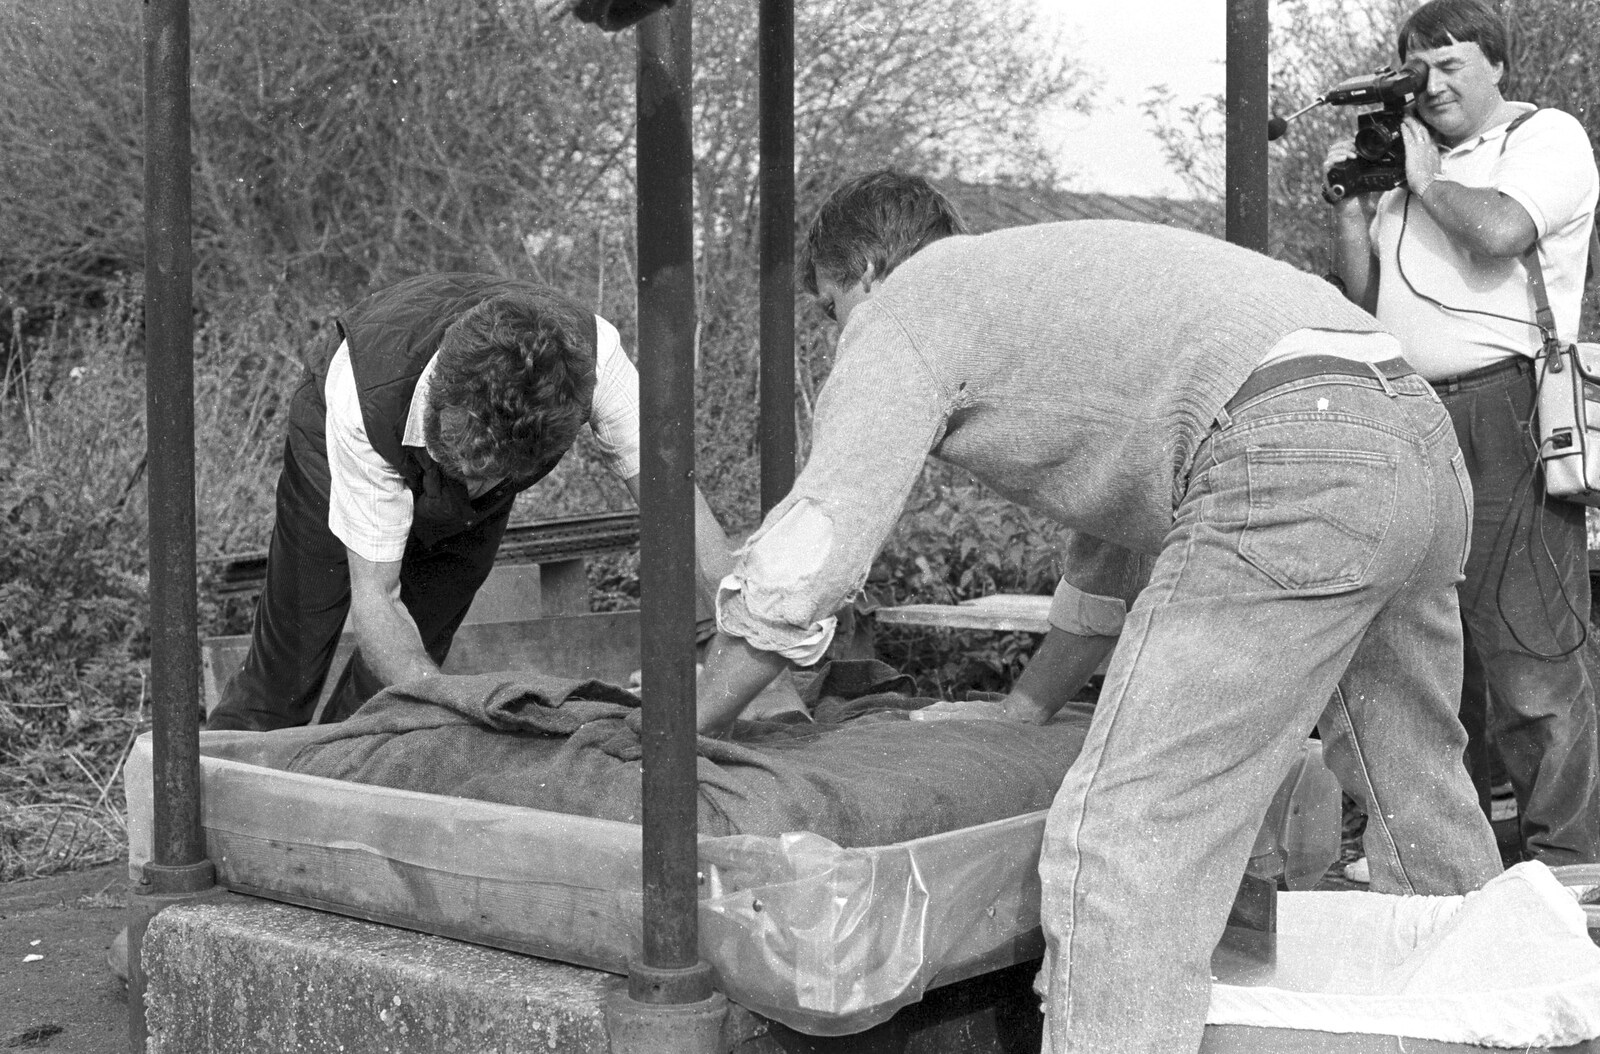 Badger and Geoff fold over the first cheese from Cider Making in Black and White, Stuston, Suffolk - 11th October 1992